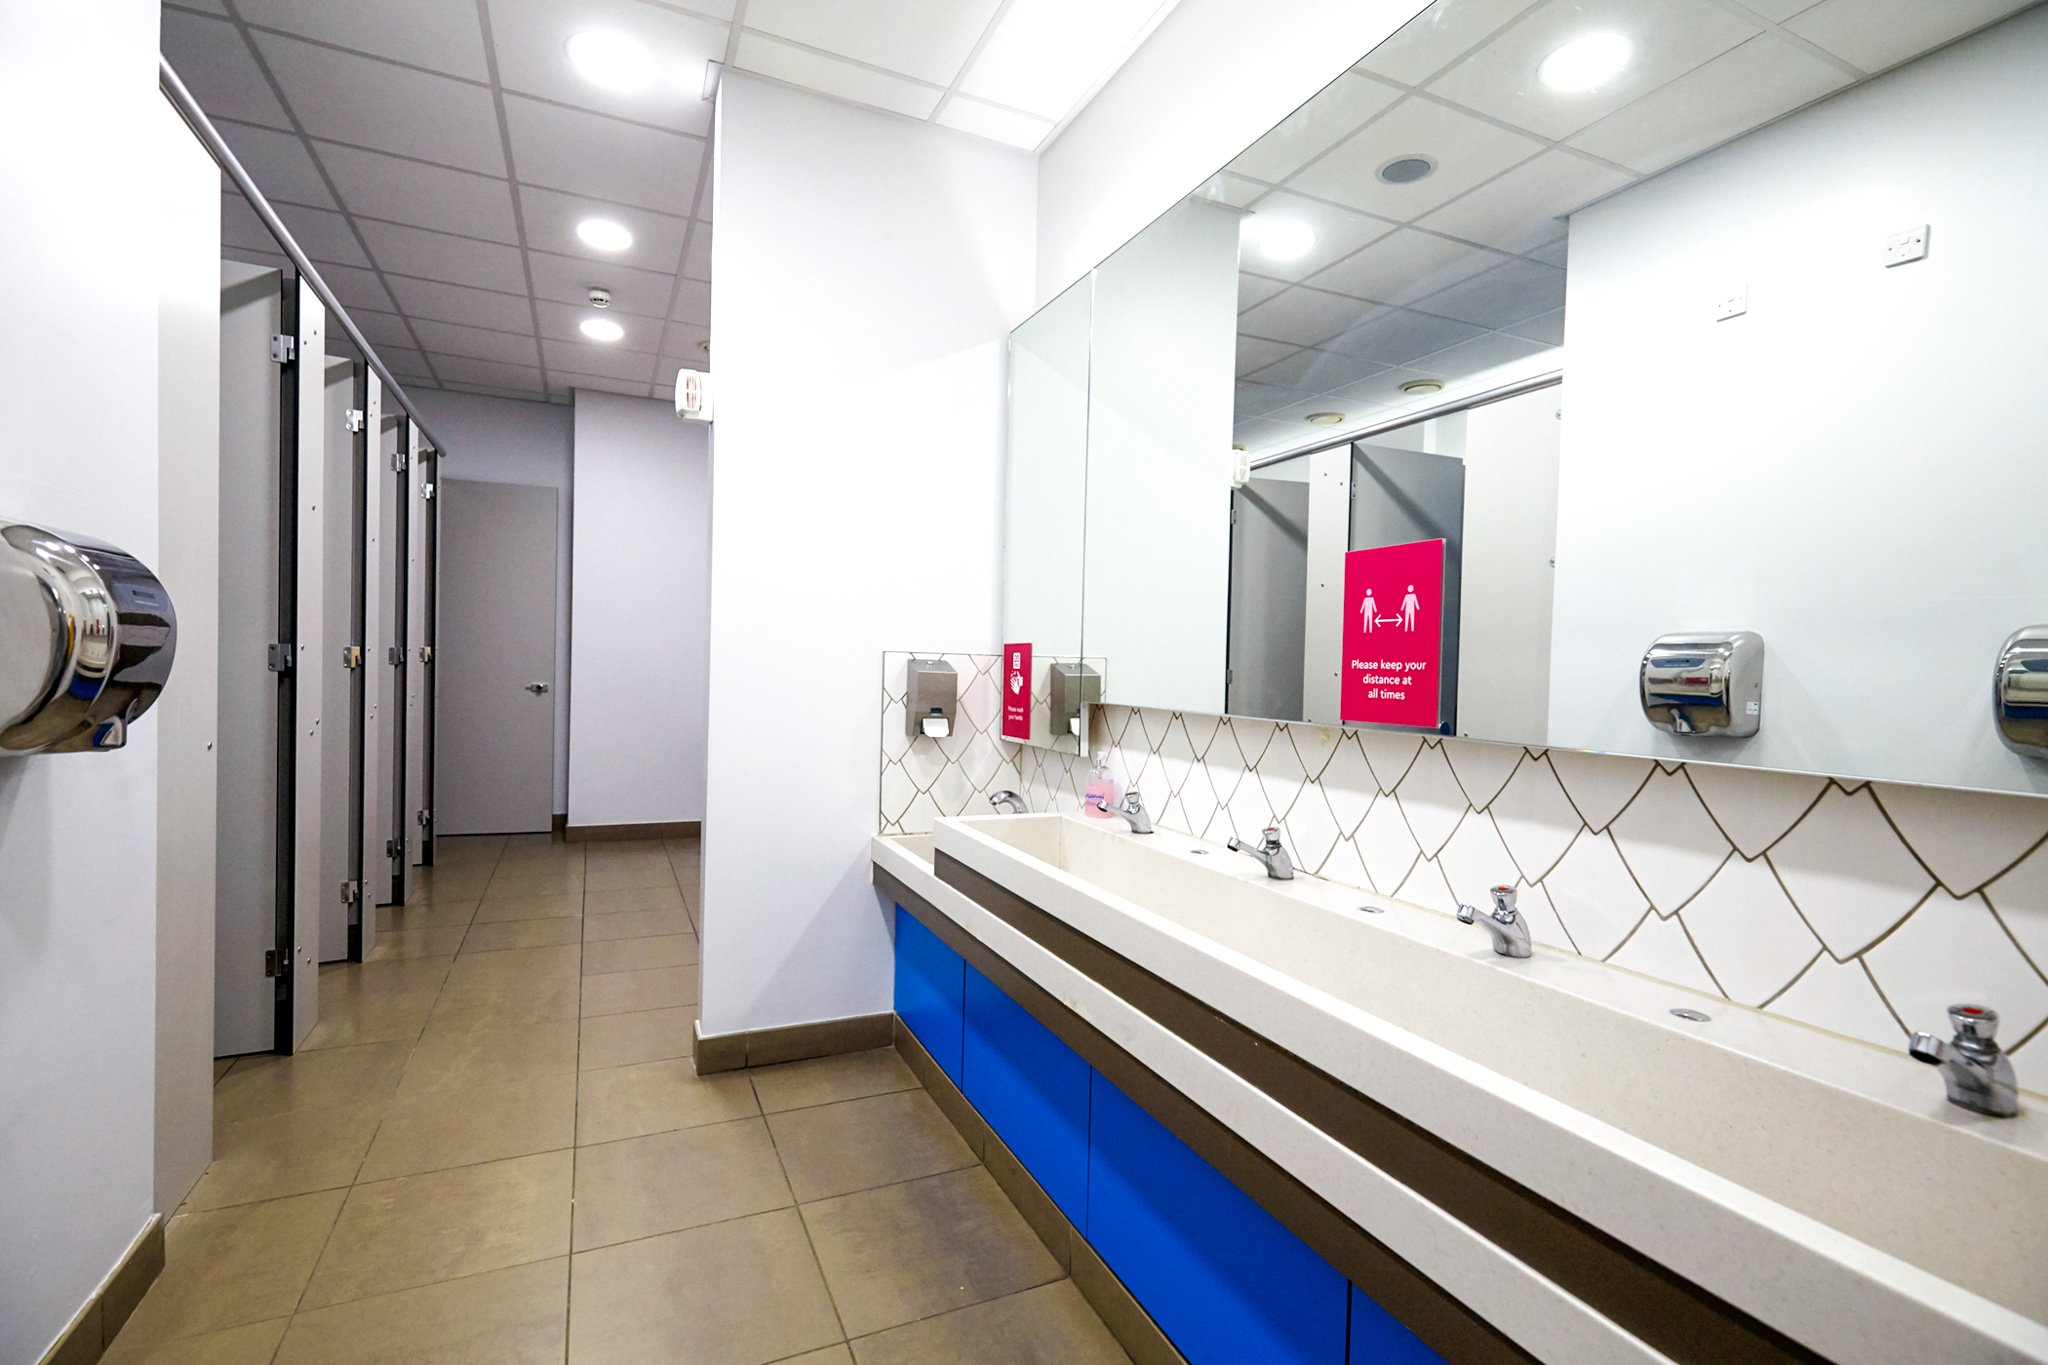 washroom with a feature tile wall, toilet cubicles and a blue vanity unit and solid surface hand wash trough with mirror above at national maritime museum.jpg